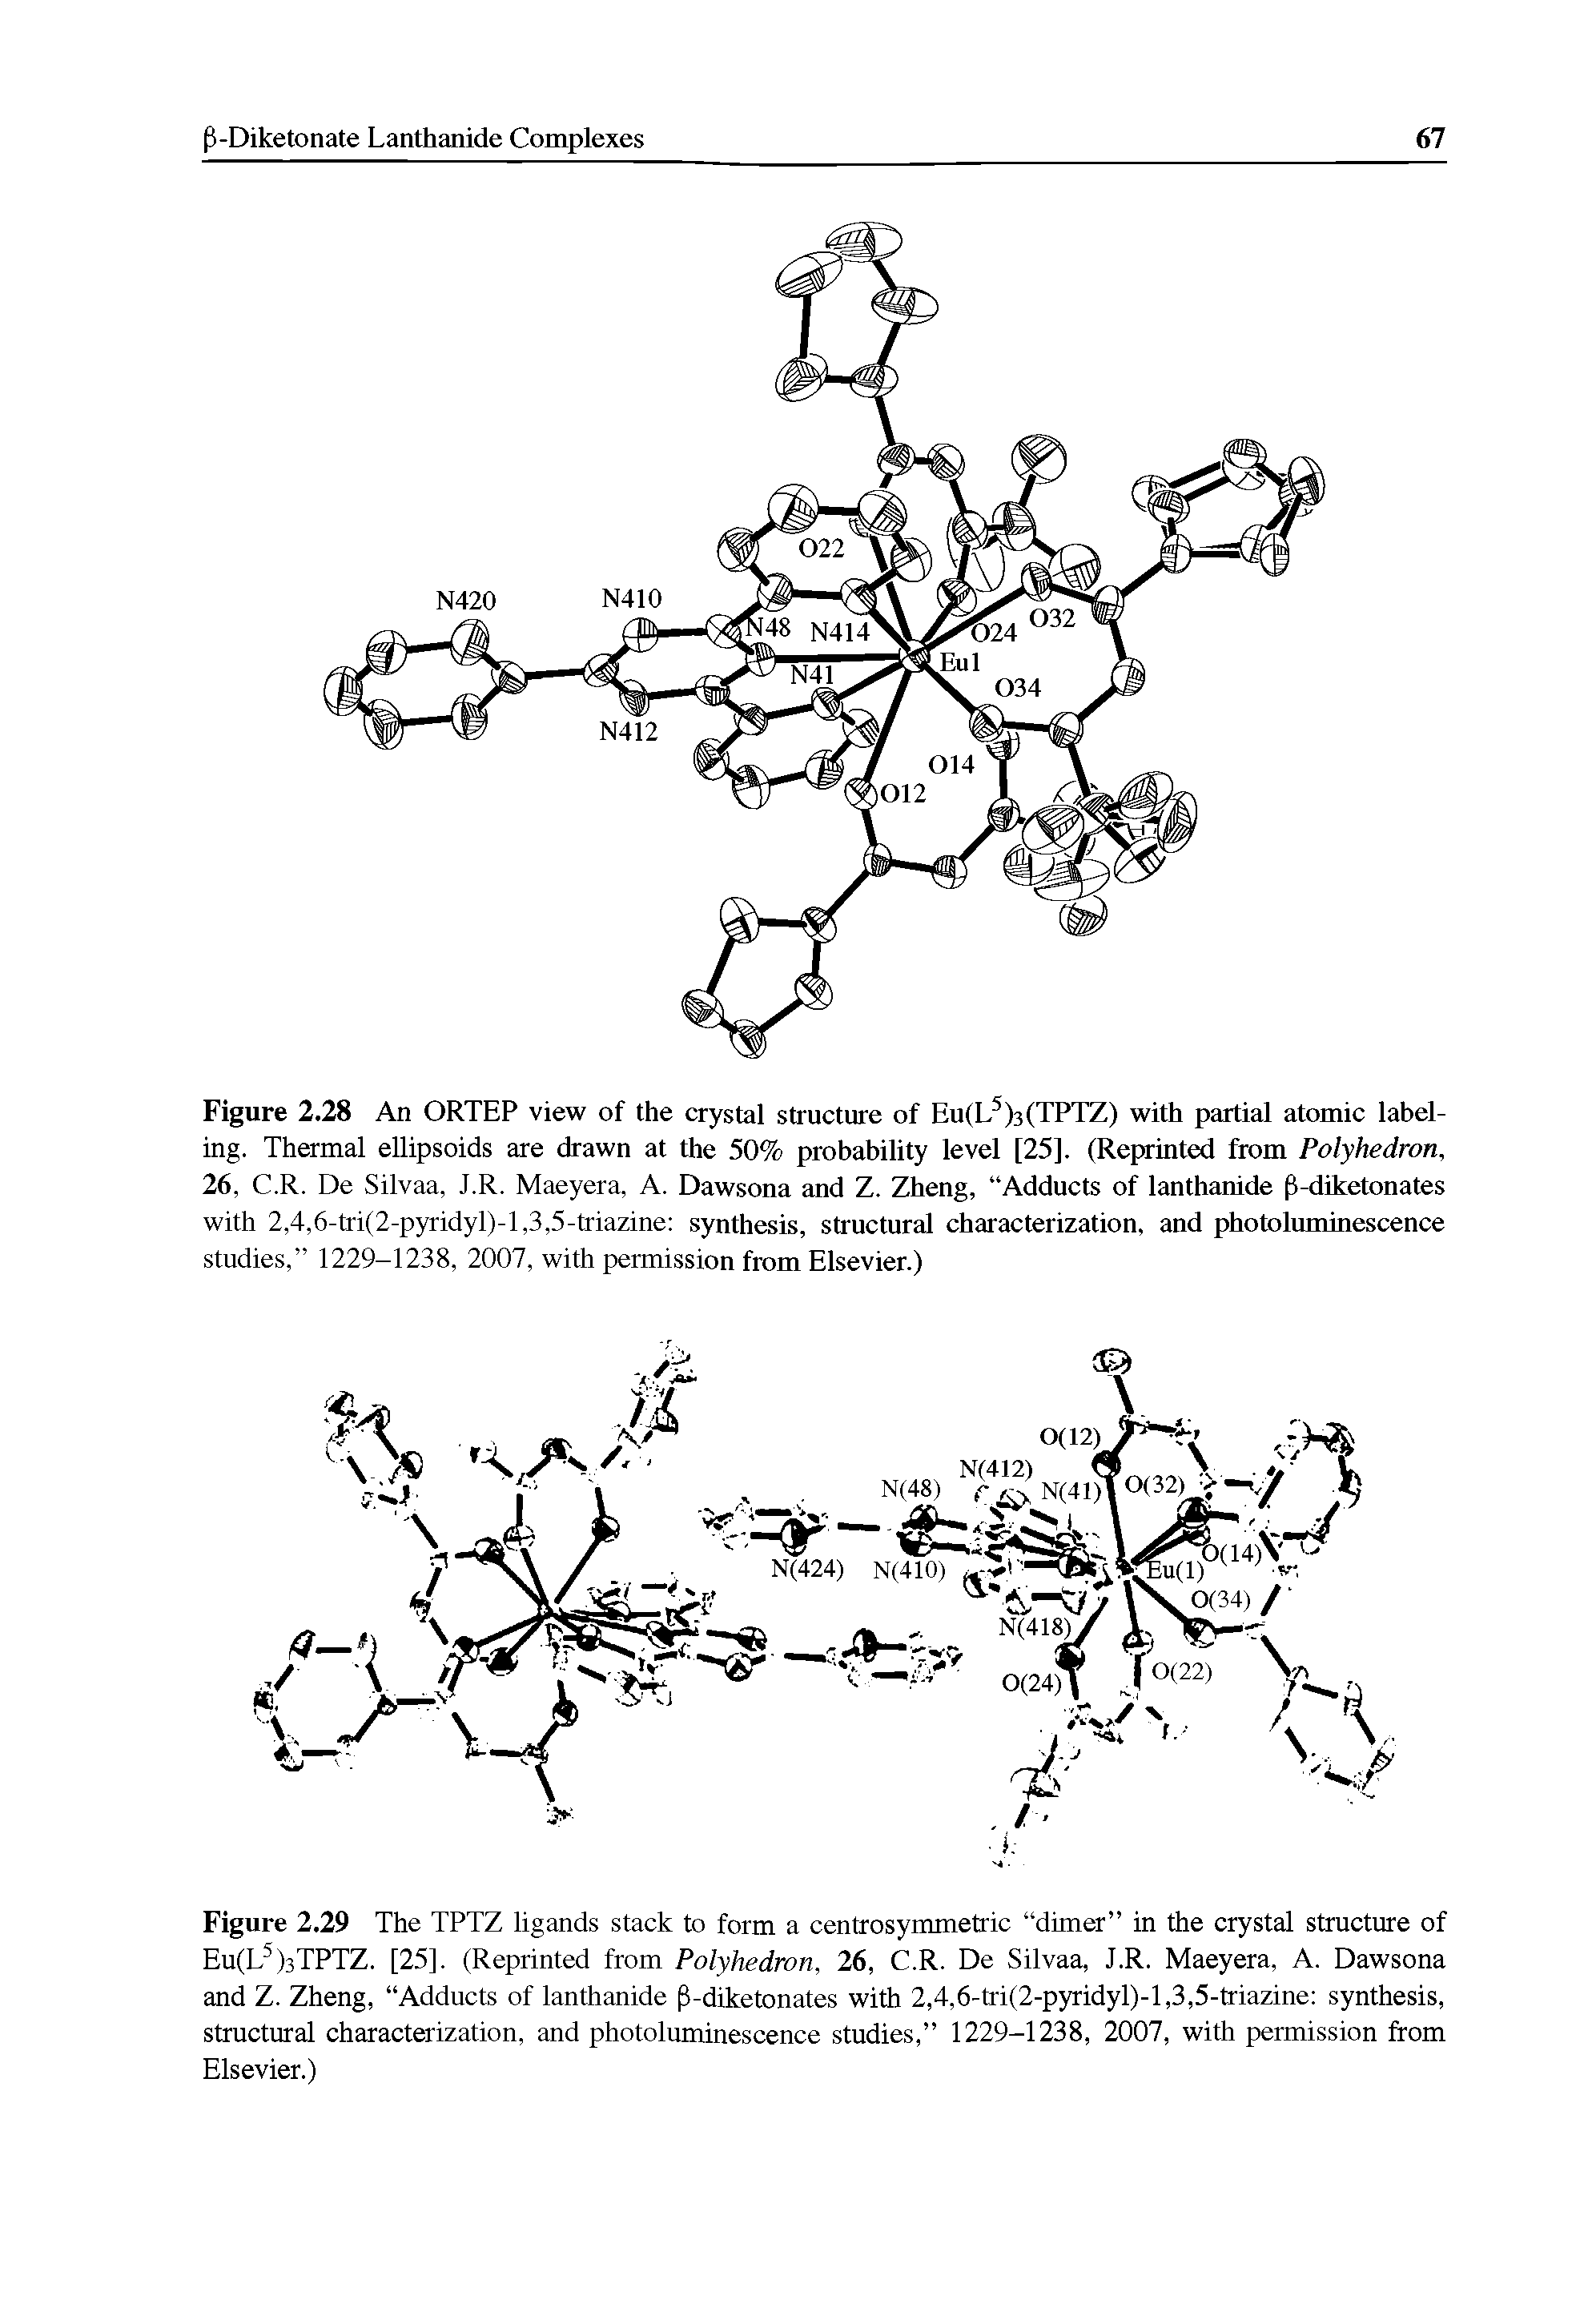 Figure 2.29 The TPTZ ligands stack to form a centrosymmetric dimer in the crystal structure of Eu(L )3TPTZ. [25]. (Reprinted from Polyhedron, 26, C.R. De Silvaa, J.R. Maeyera, A. Dawsona and Z. Zheng, Adducts of lanthanide -diketonates with 2,4,6-tri(2-pyridyl)-l,3,5-triazine synthesis, structural characterization, and photoluminescence studies, 1229-1238, 2007, with permission from Elsevier.)...